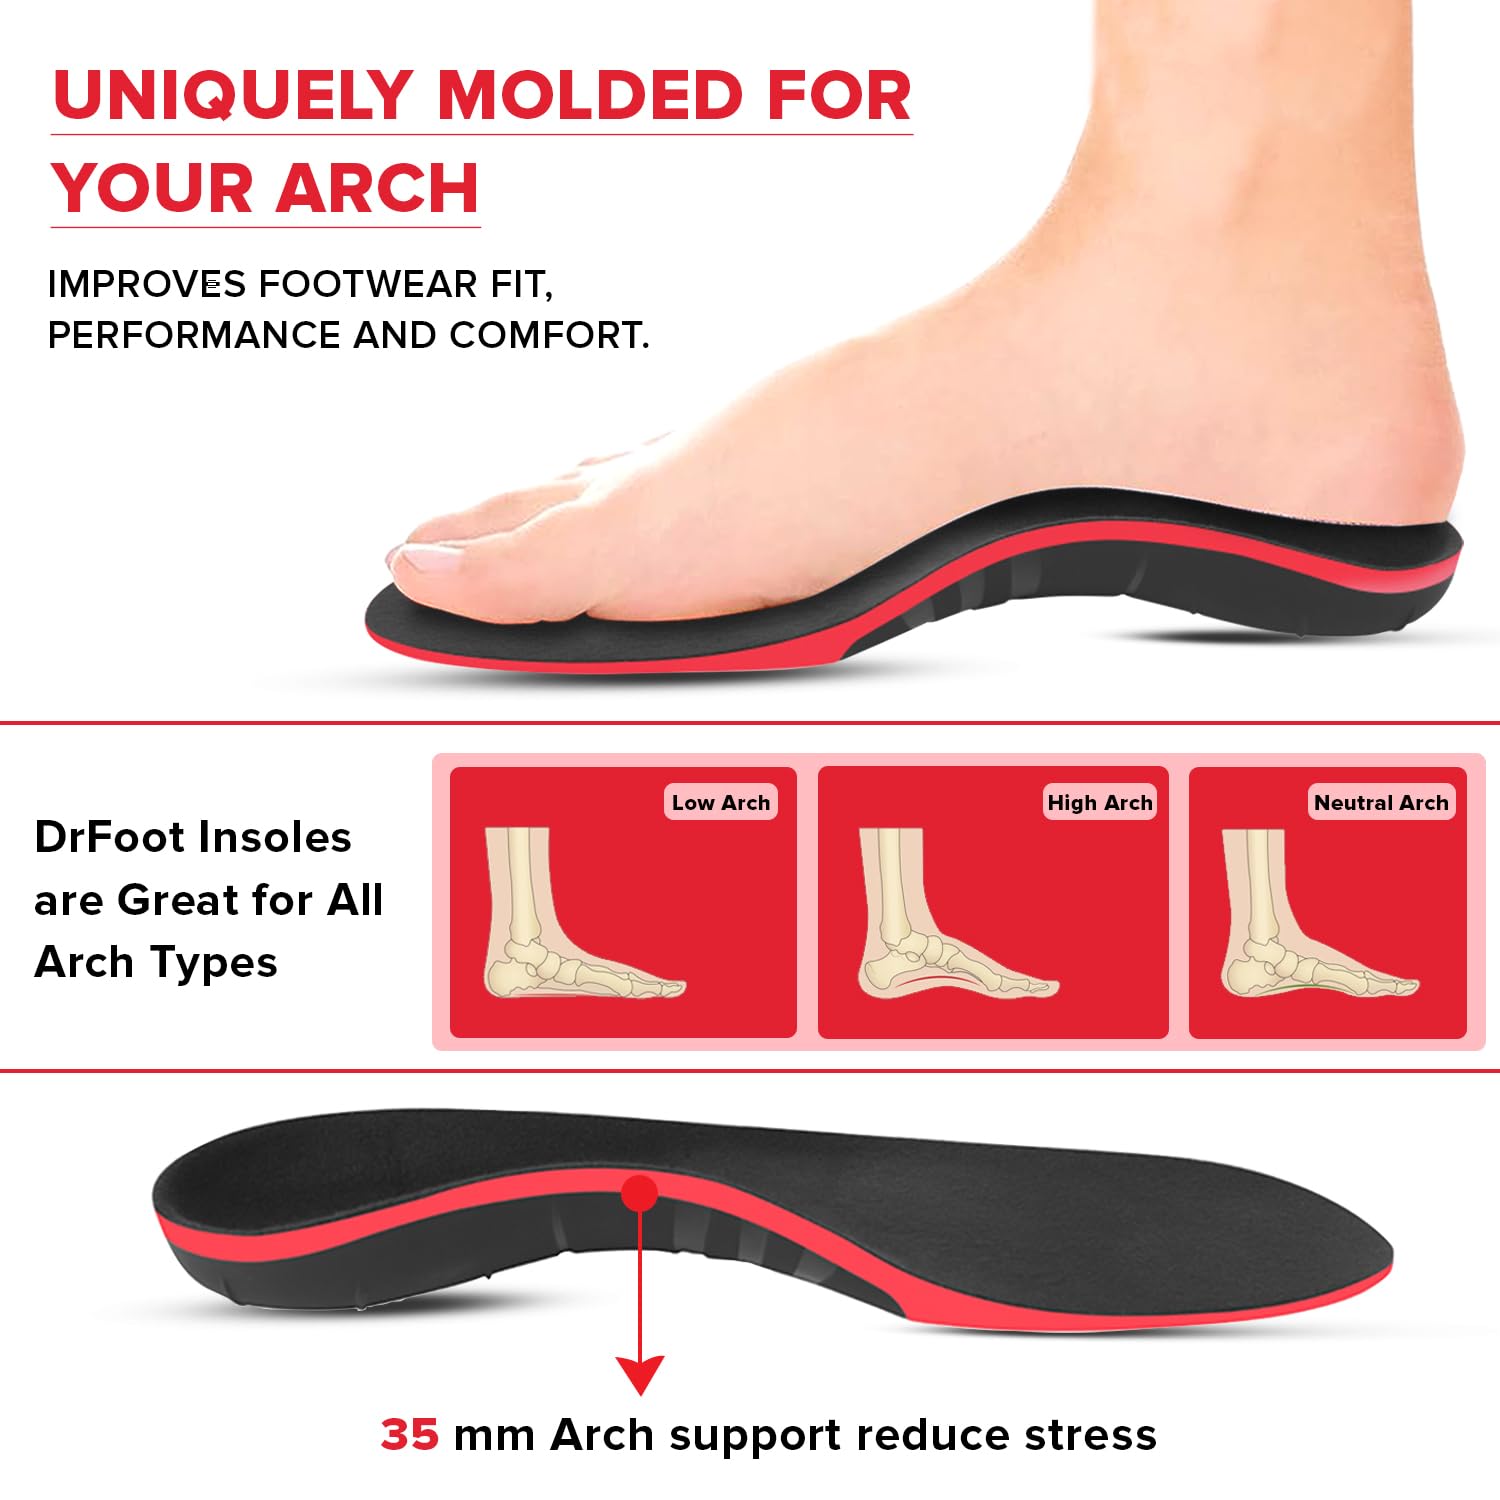 Dr Foot High Arch Support Insoles | Shoe Inserts For Plantar Fasciitis, Flat Feet, Feet Pain, Heel Spur Pain |For All Day Comfort & Support & Shock Absorption | Men and Women - 1 Pair (XL Size)